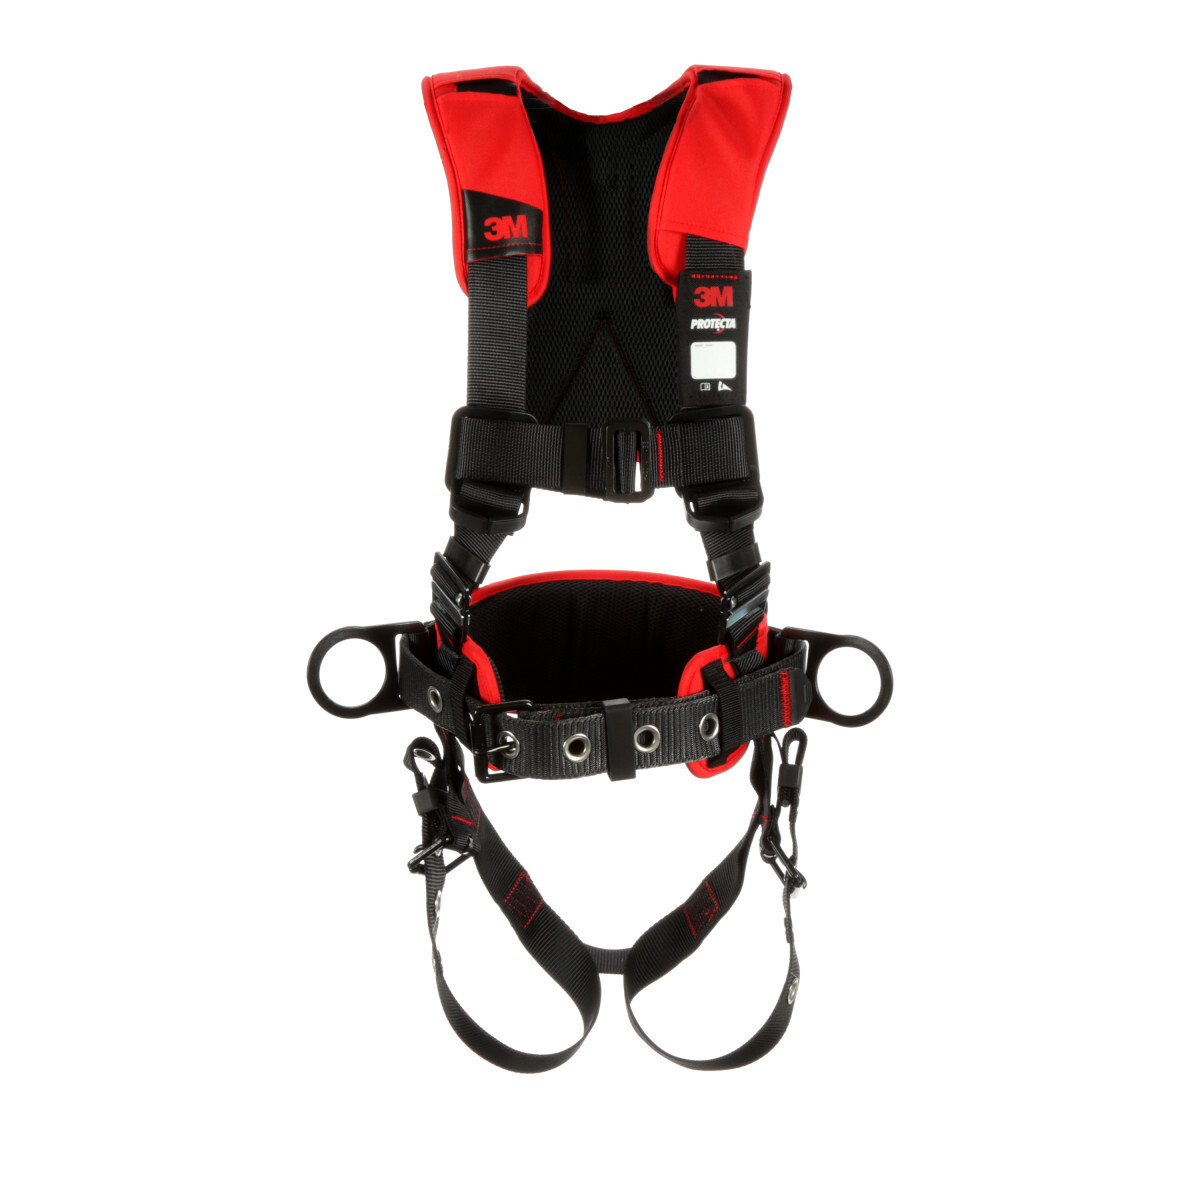 3M™ Protecta® Medium - Large Comfort Construction Style Full Body Positioning Harness With Easy-Link Web Adapter, Auto-Resetting